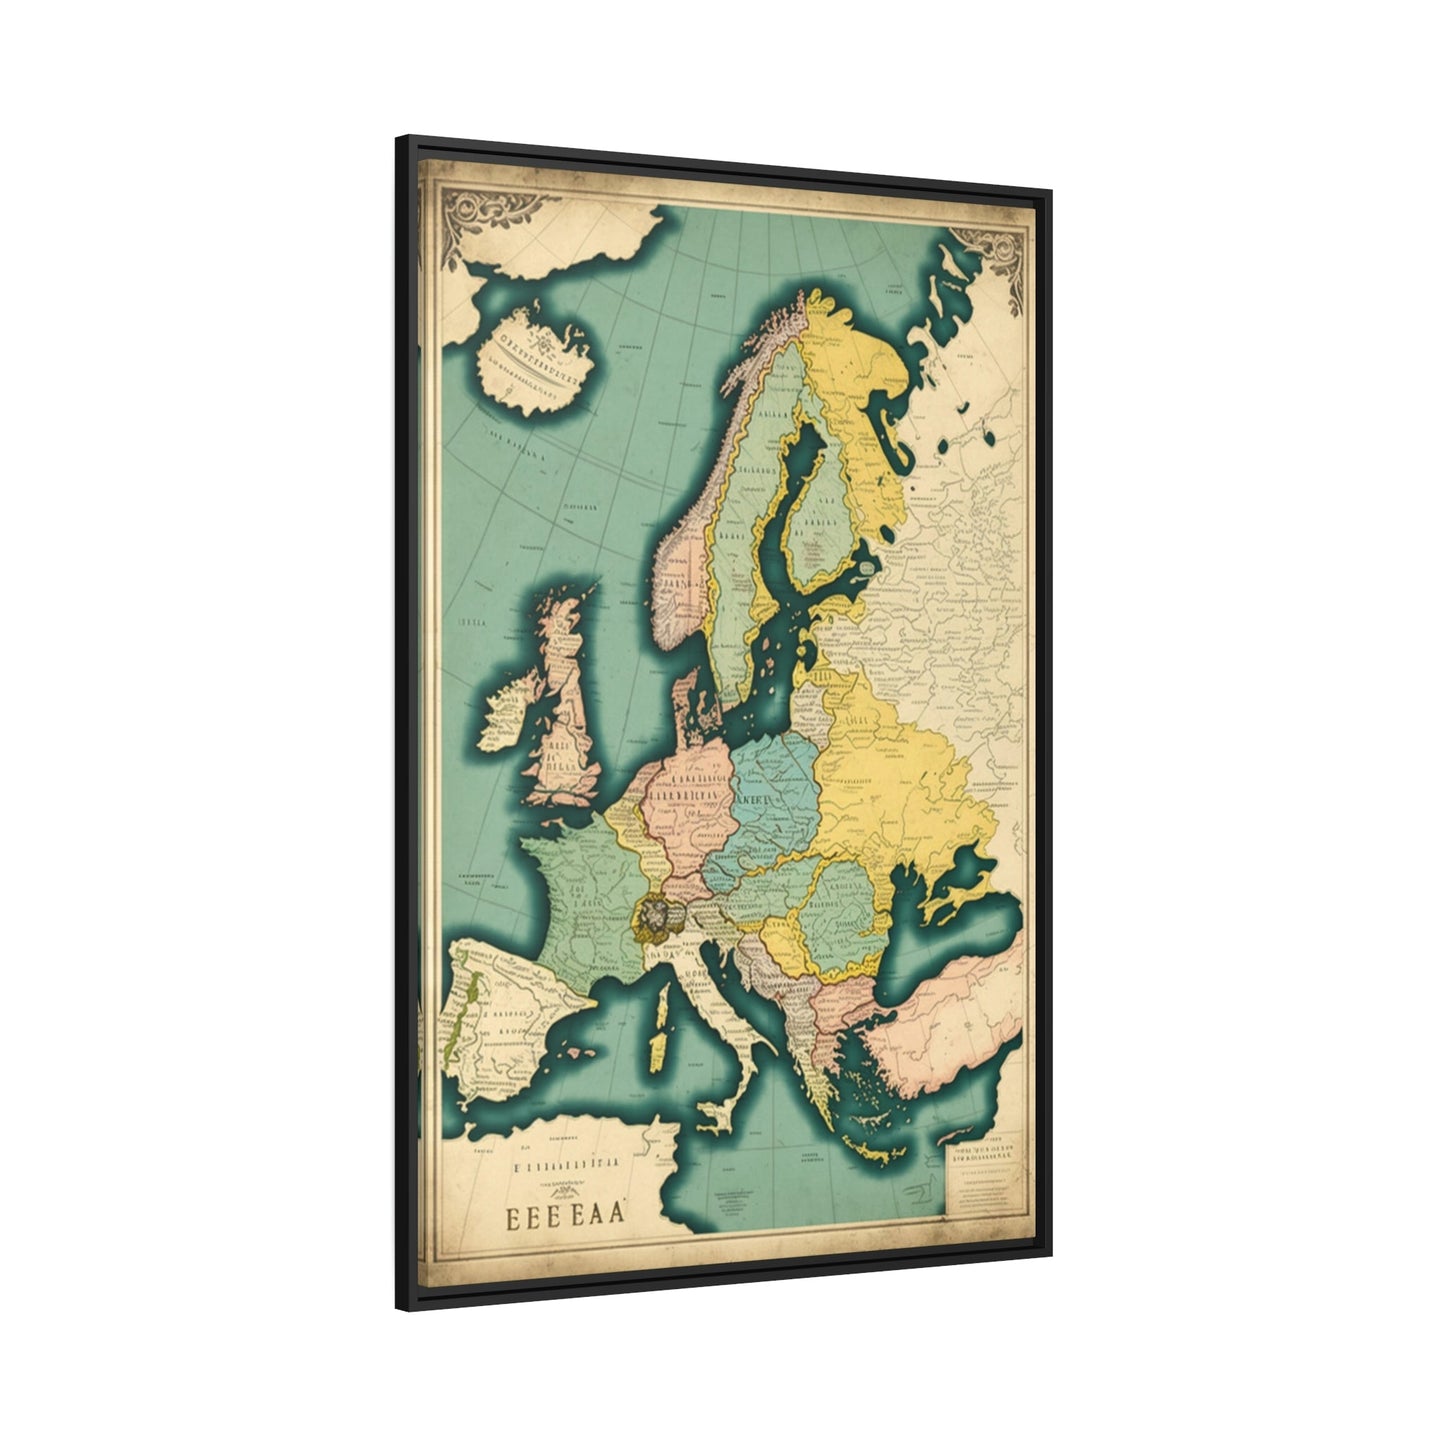 Vintage Visions: A Painting of Vintage Maps as a Window to the Past